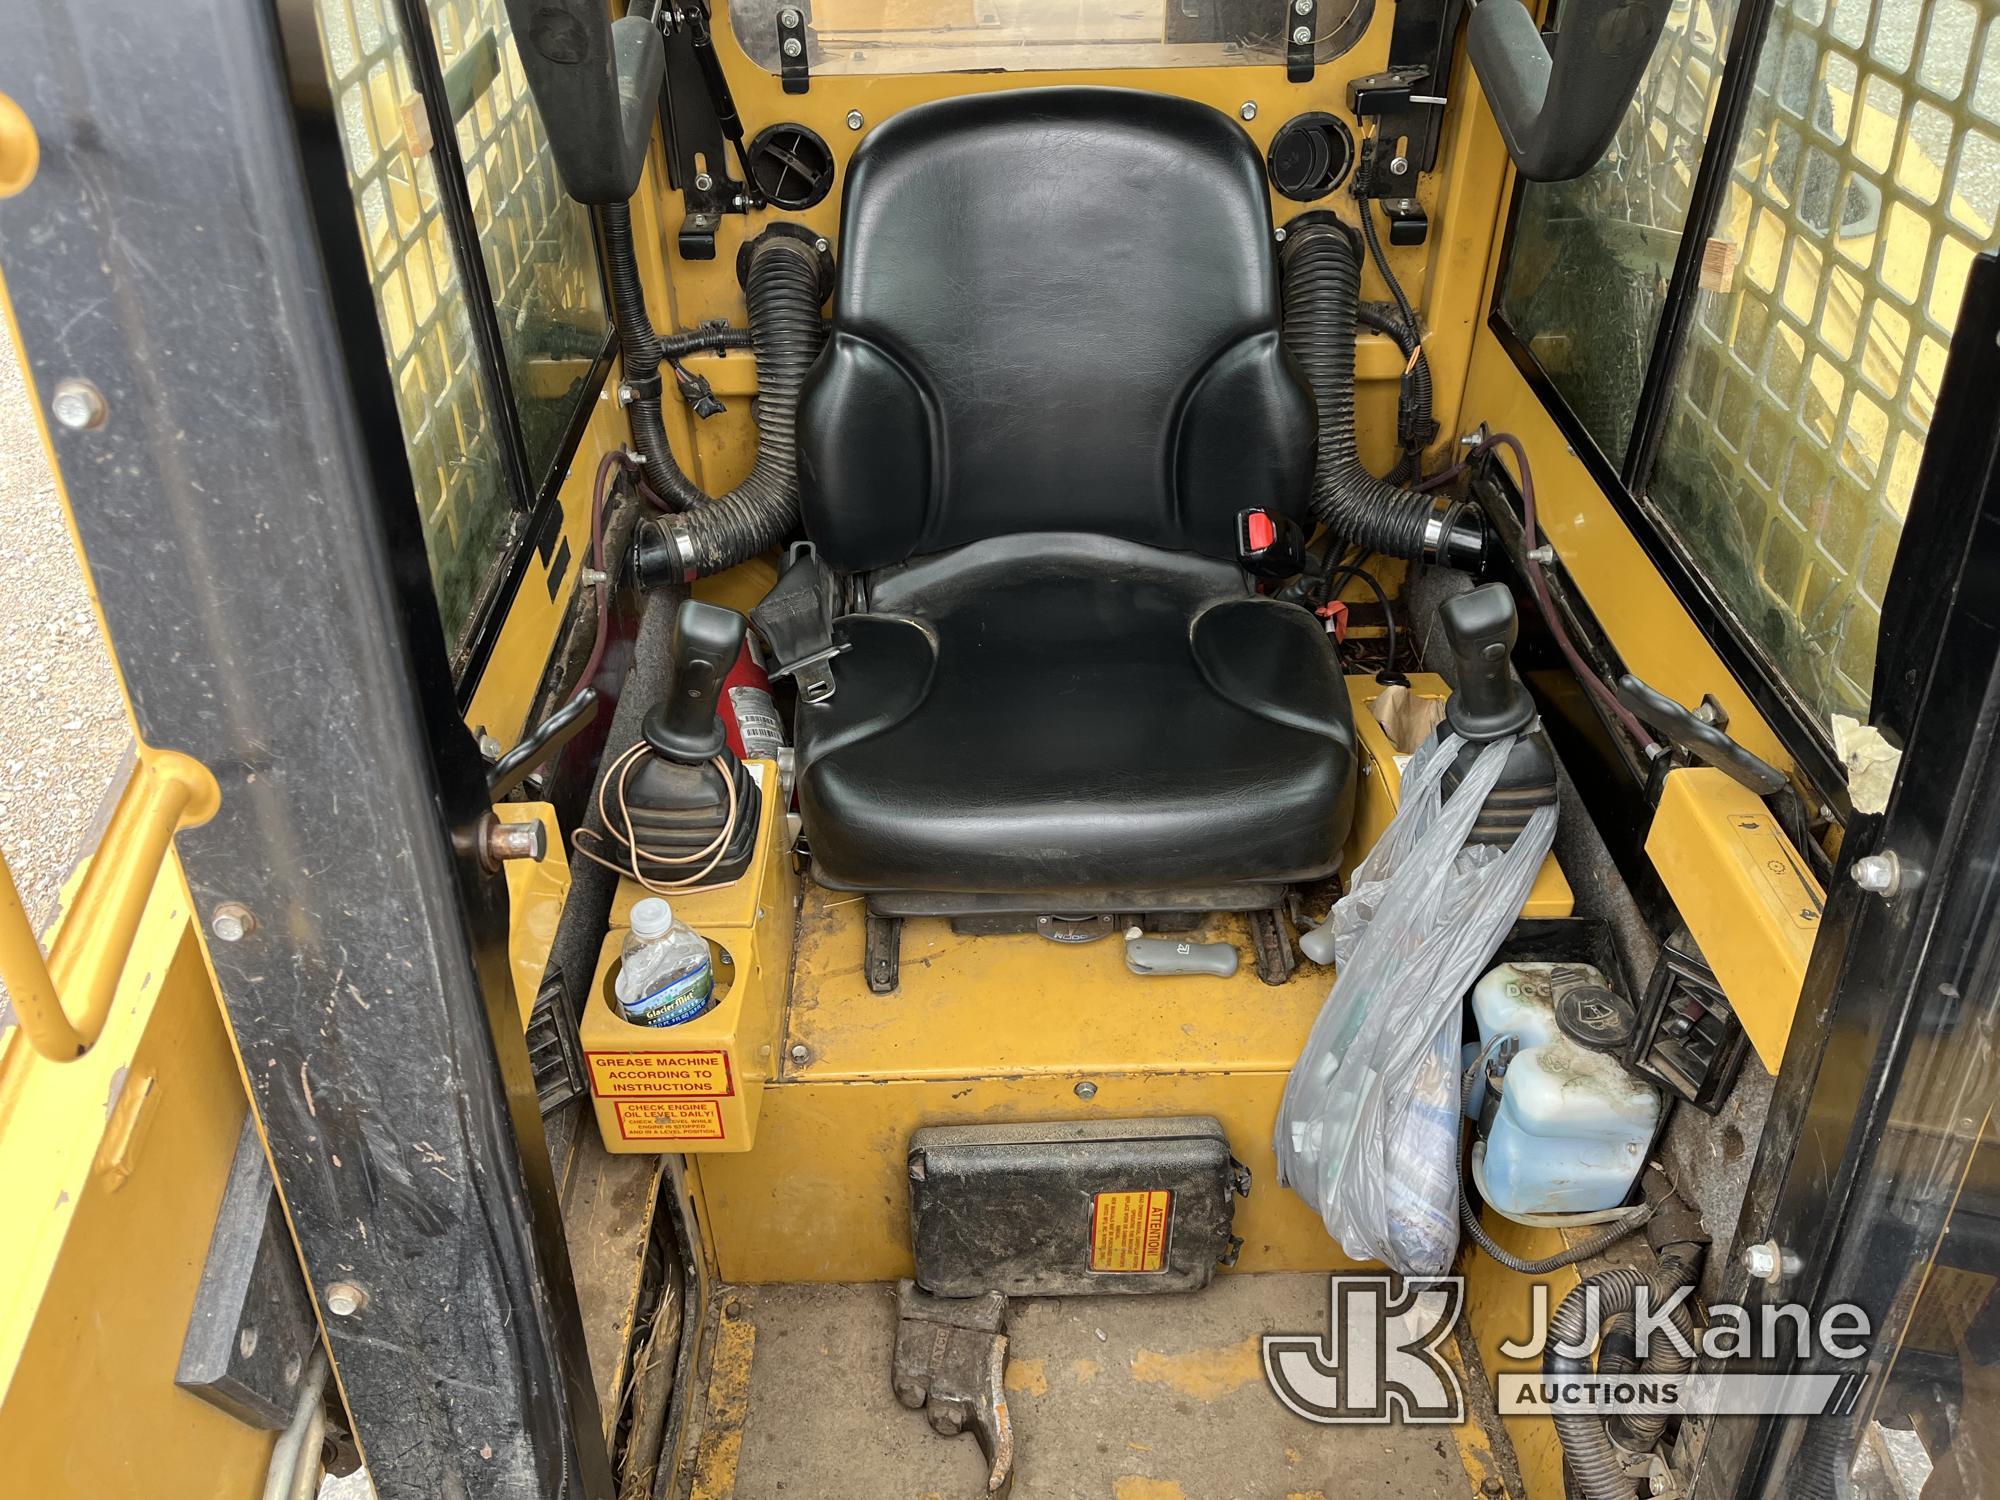 (Smock, PA) 2018 Rayco C100 Rubber Tracked Skid Steer Loader Runs, Moves & Operates, Broken Tooth Po